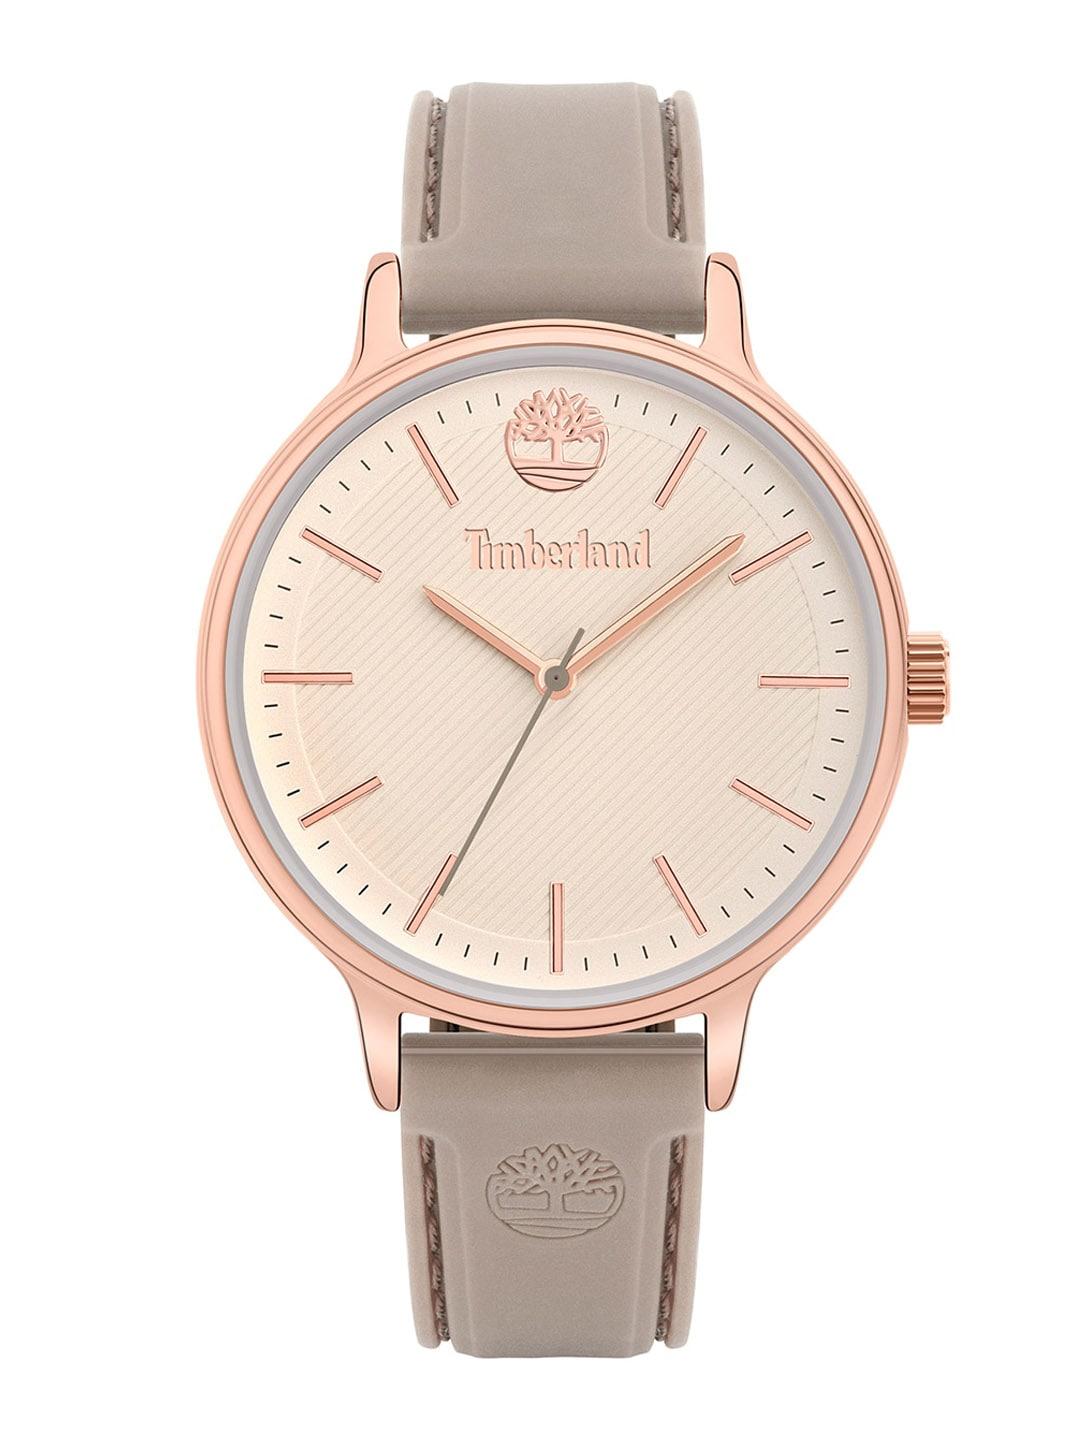 timberland-women-off-white-chesley-analog-watches-tbl.15956myr/63p